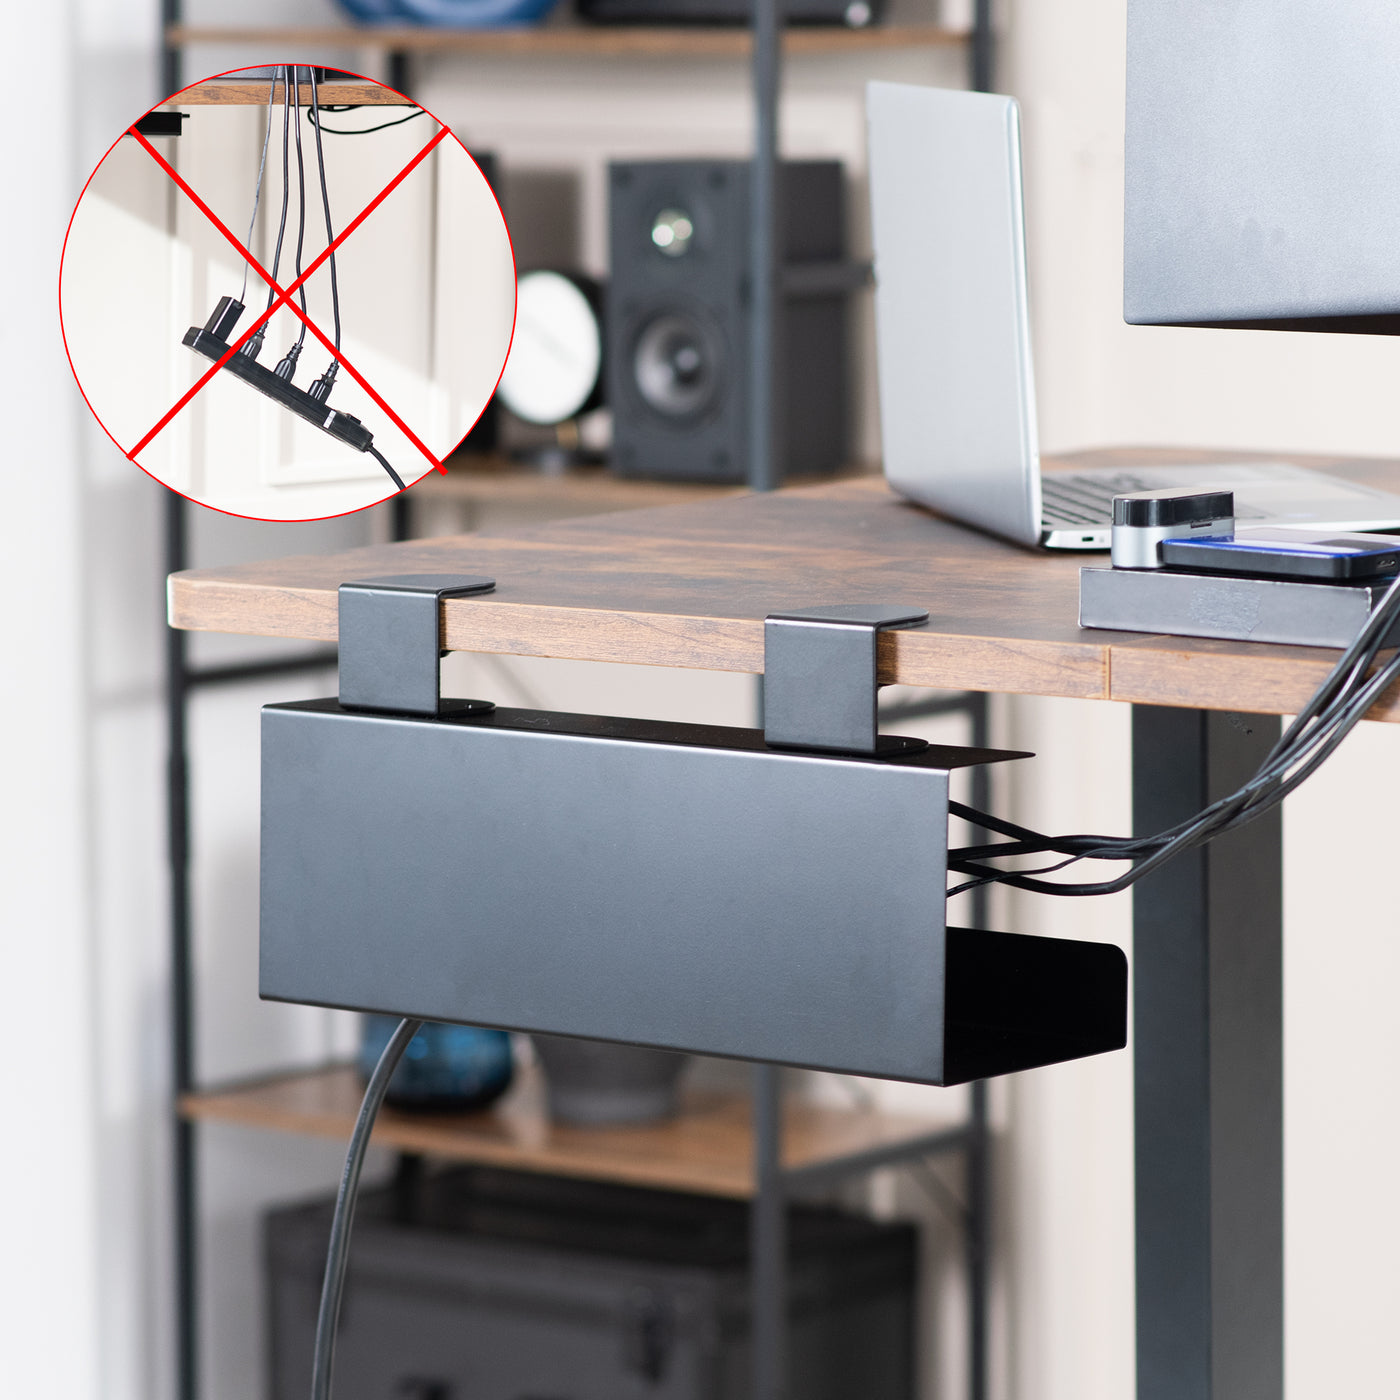 Black Clamp-on Cable Management Tray